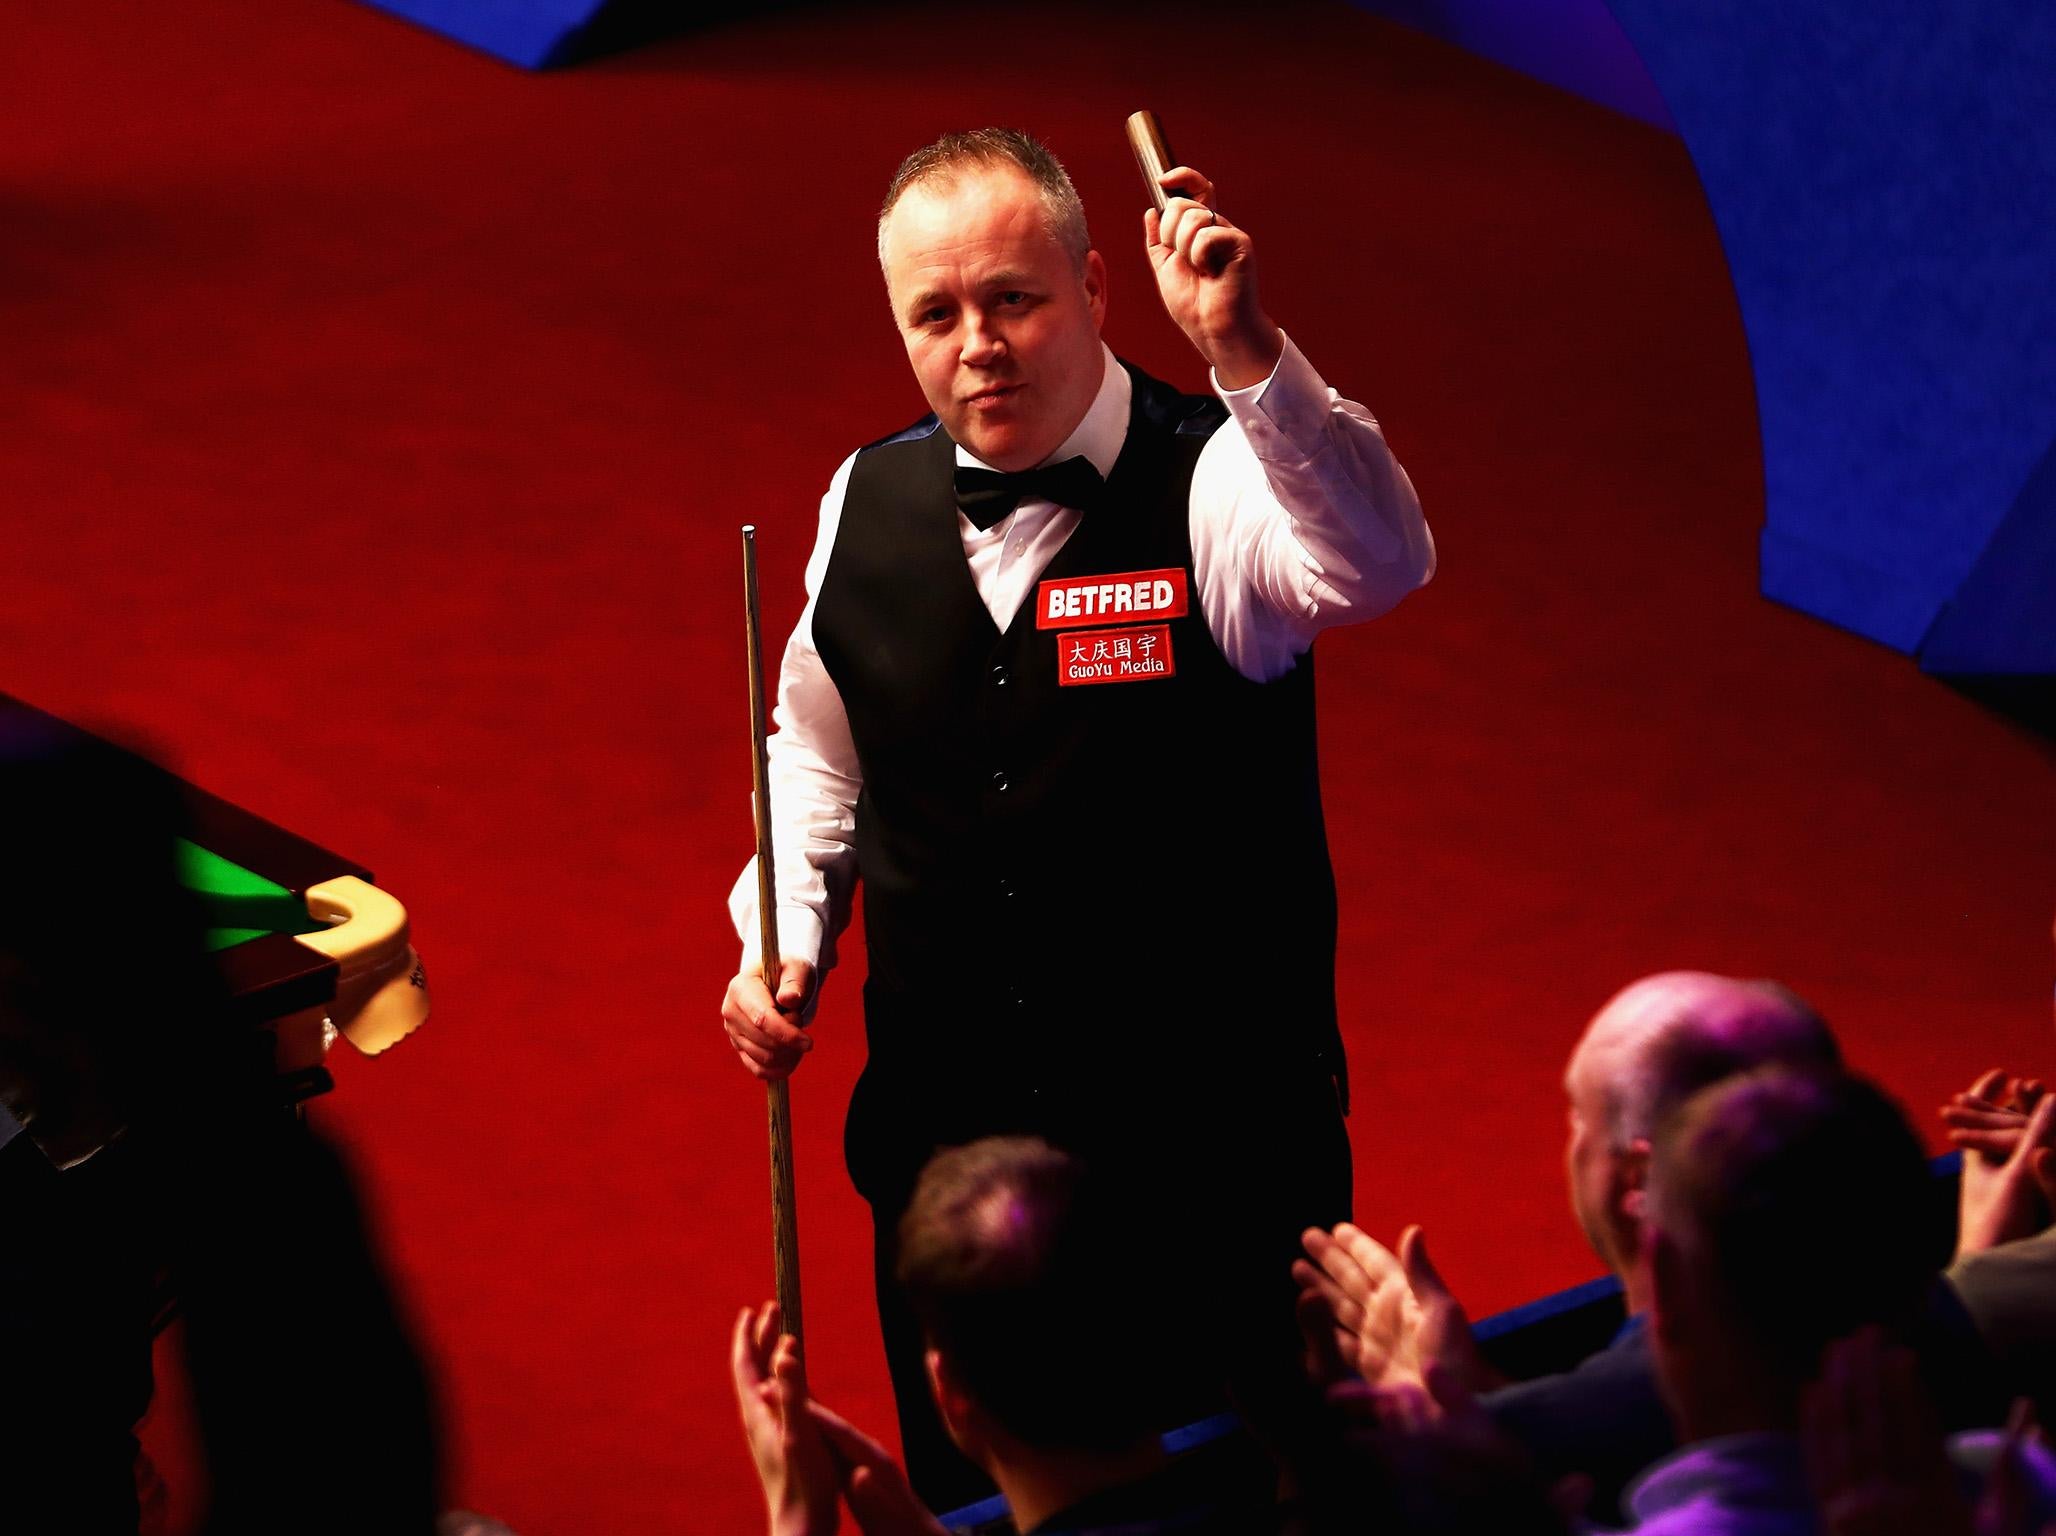 John Higgins edged out Judd Trump in the final frame